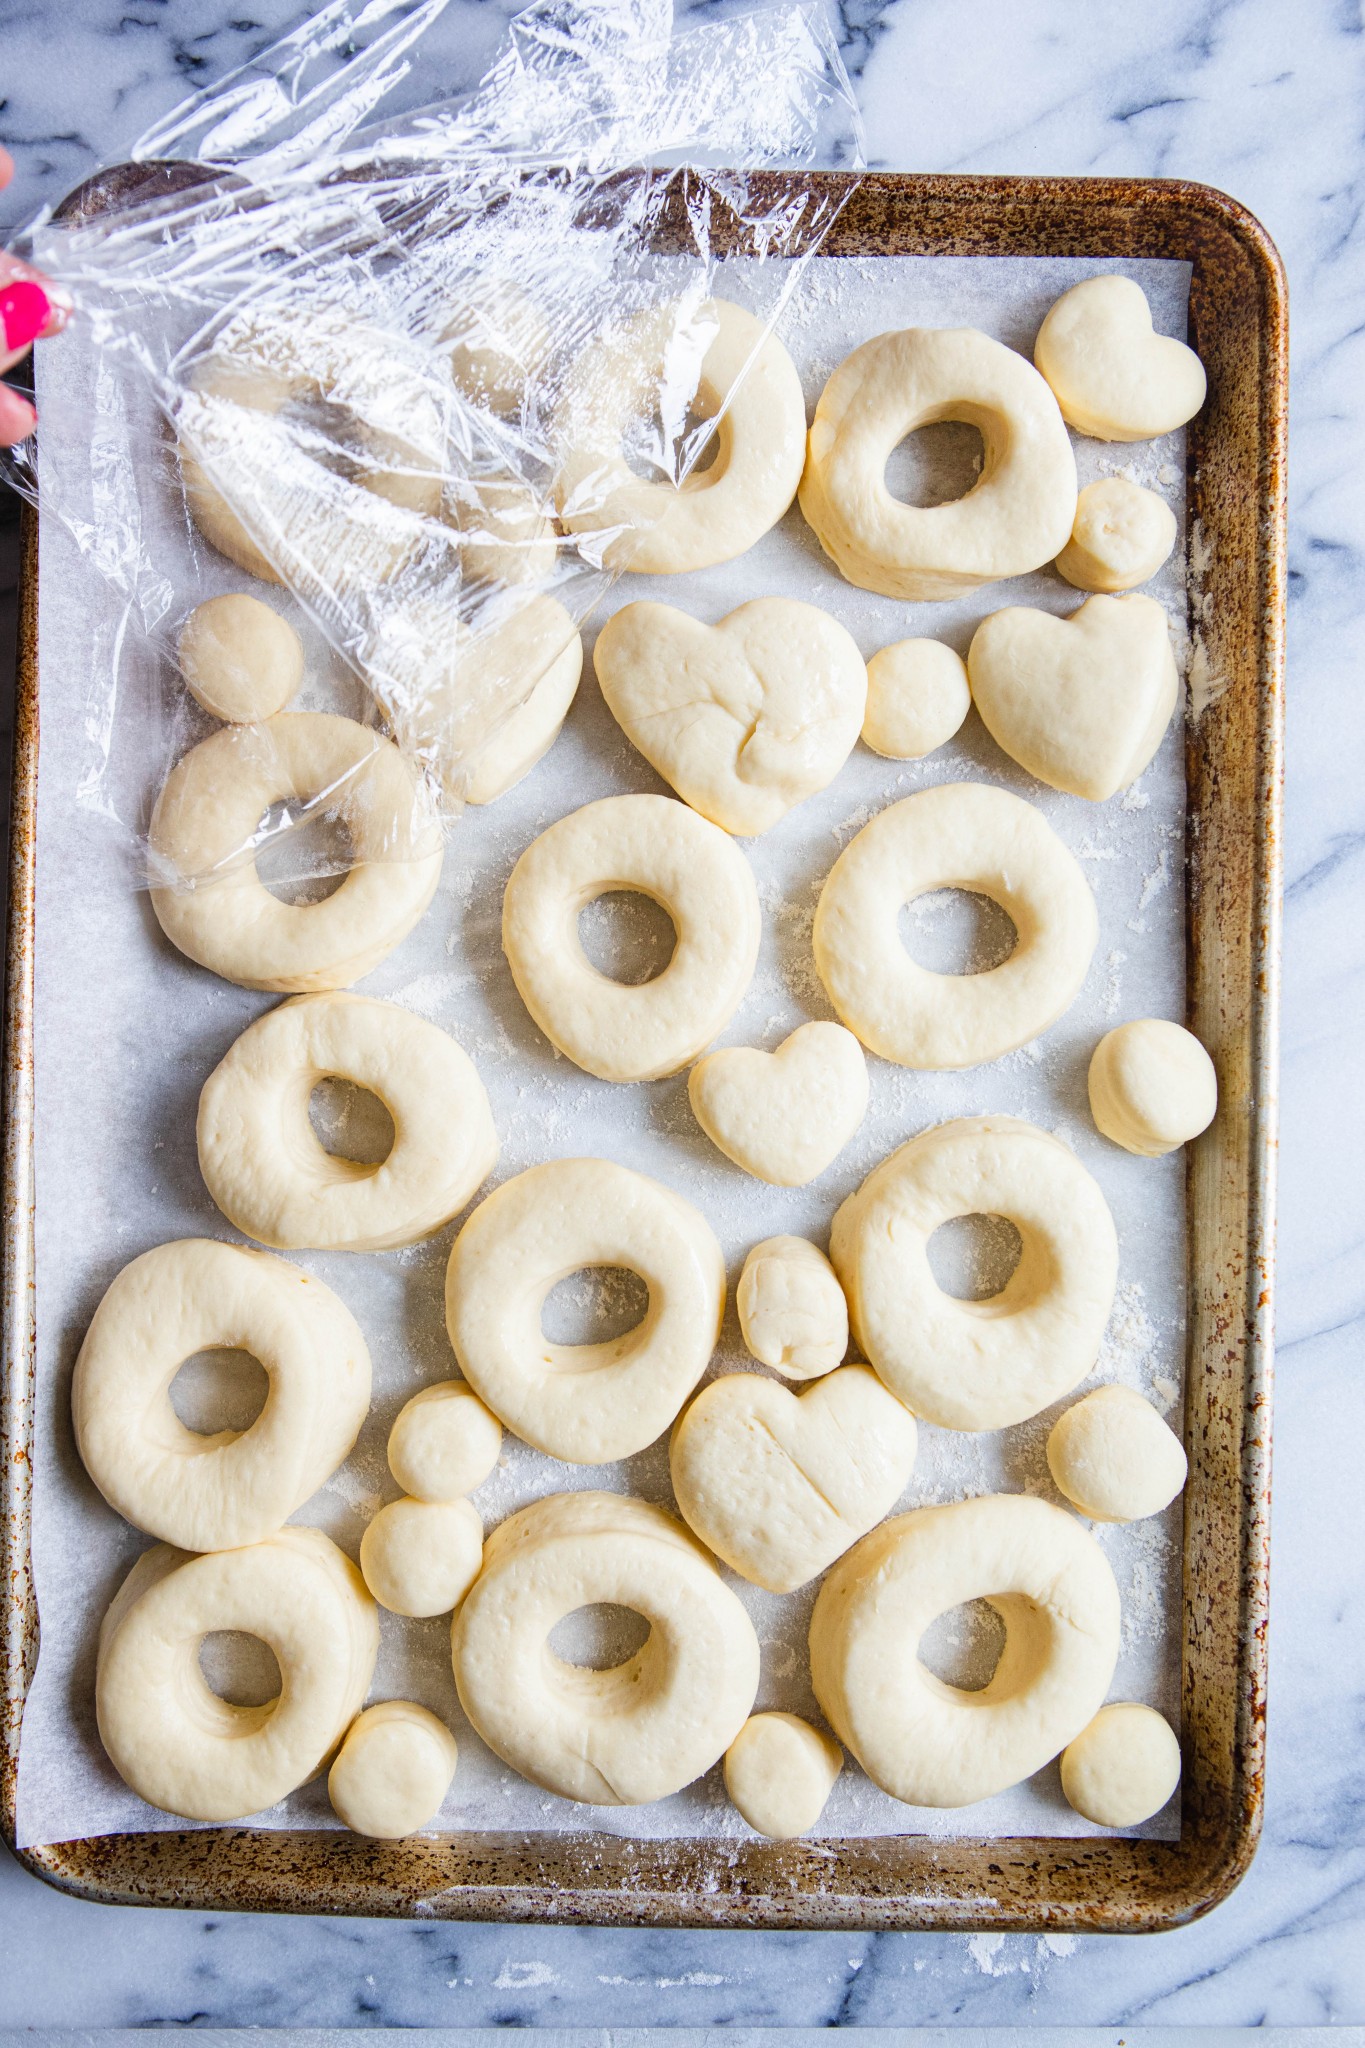 risen donuts on a baking sheet ready to be fried